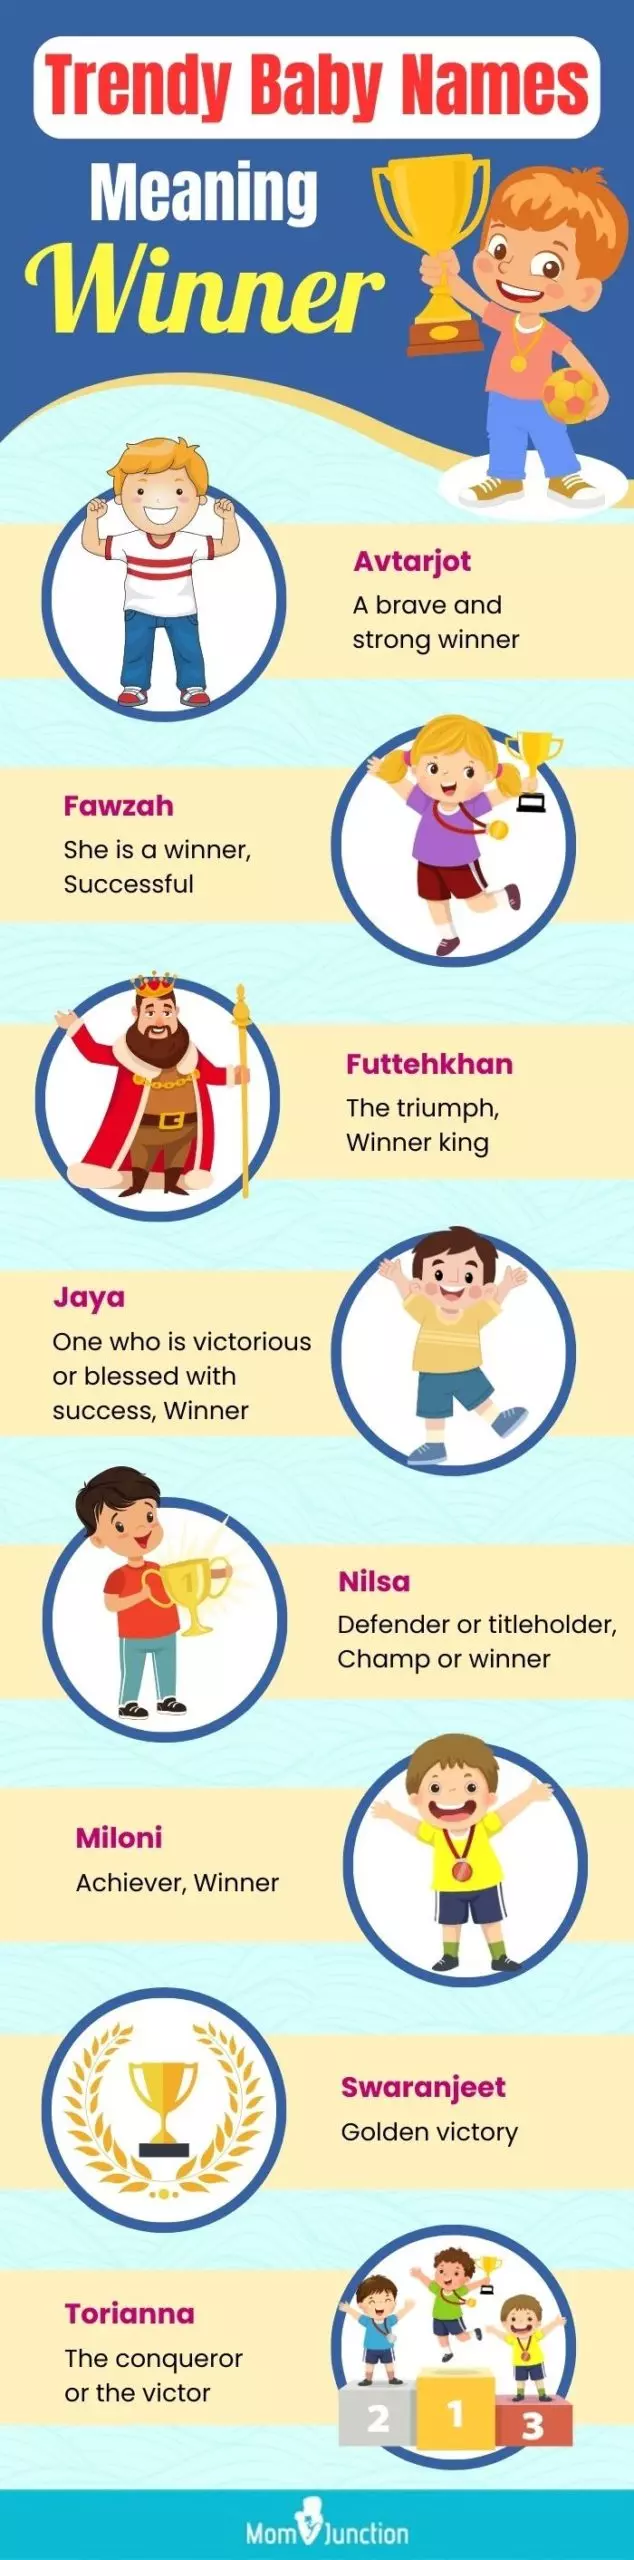 trendy baby names meaning winner (infographic)